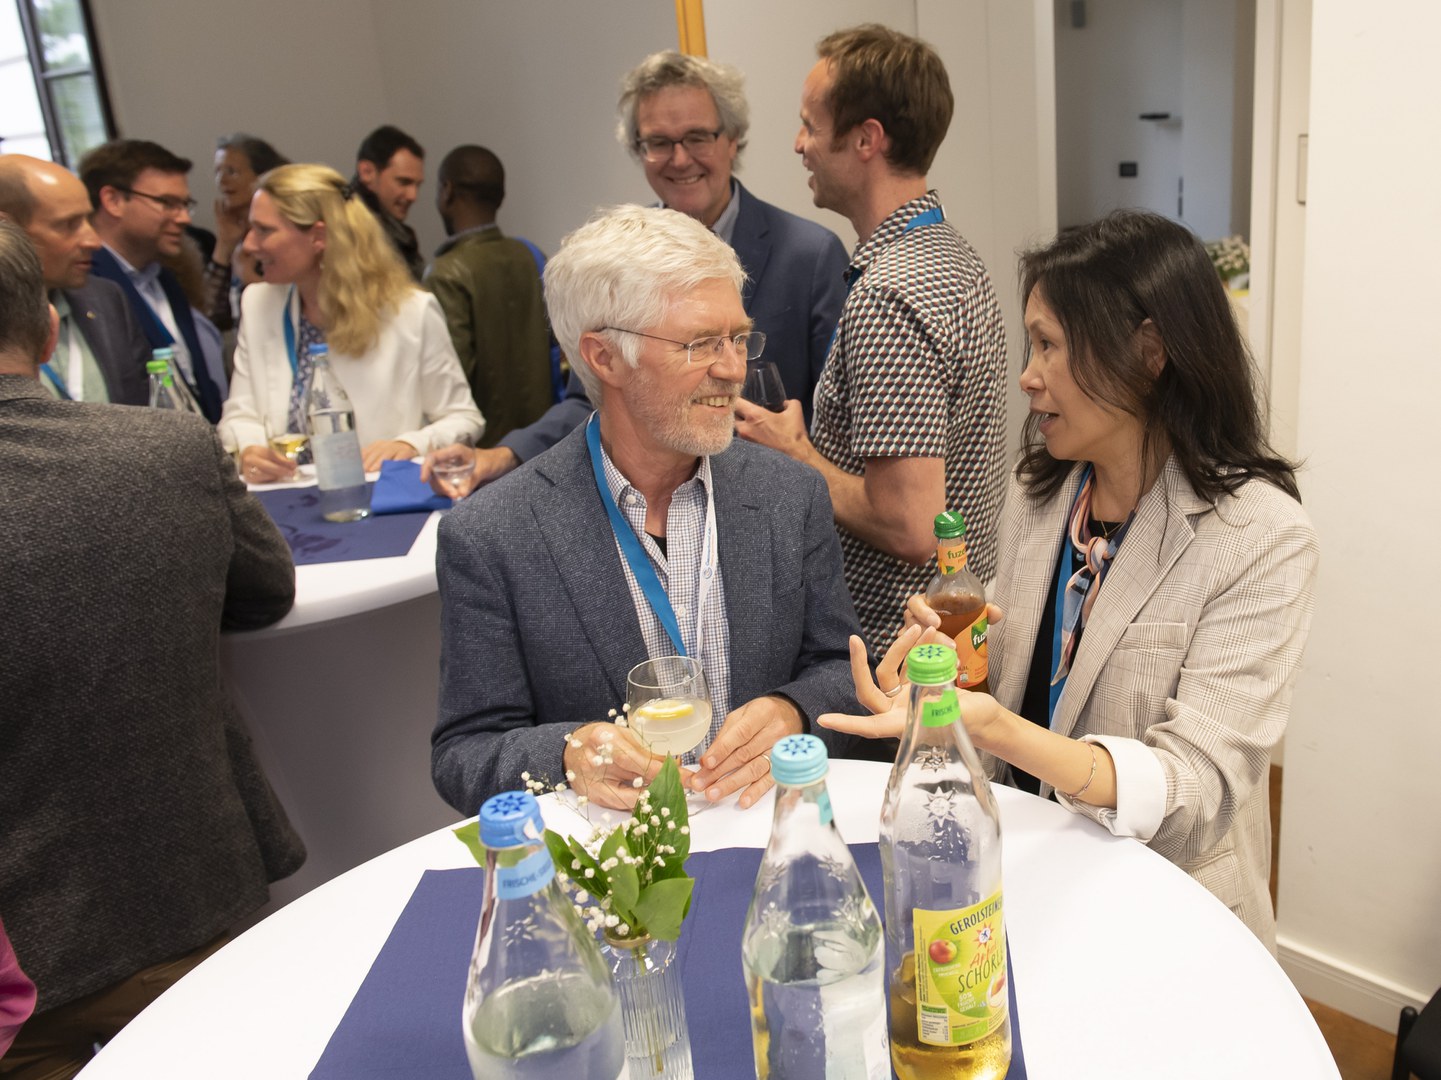 Prof. Dr. Shen Xiaomeng and Prof. Dr. Detlef Müller-Mahn at the reception